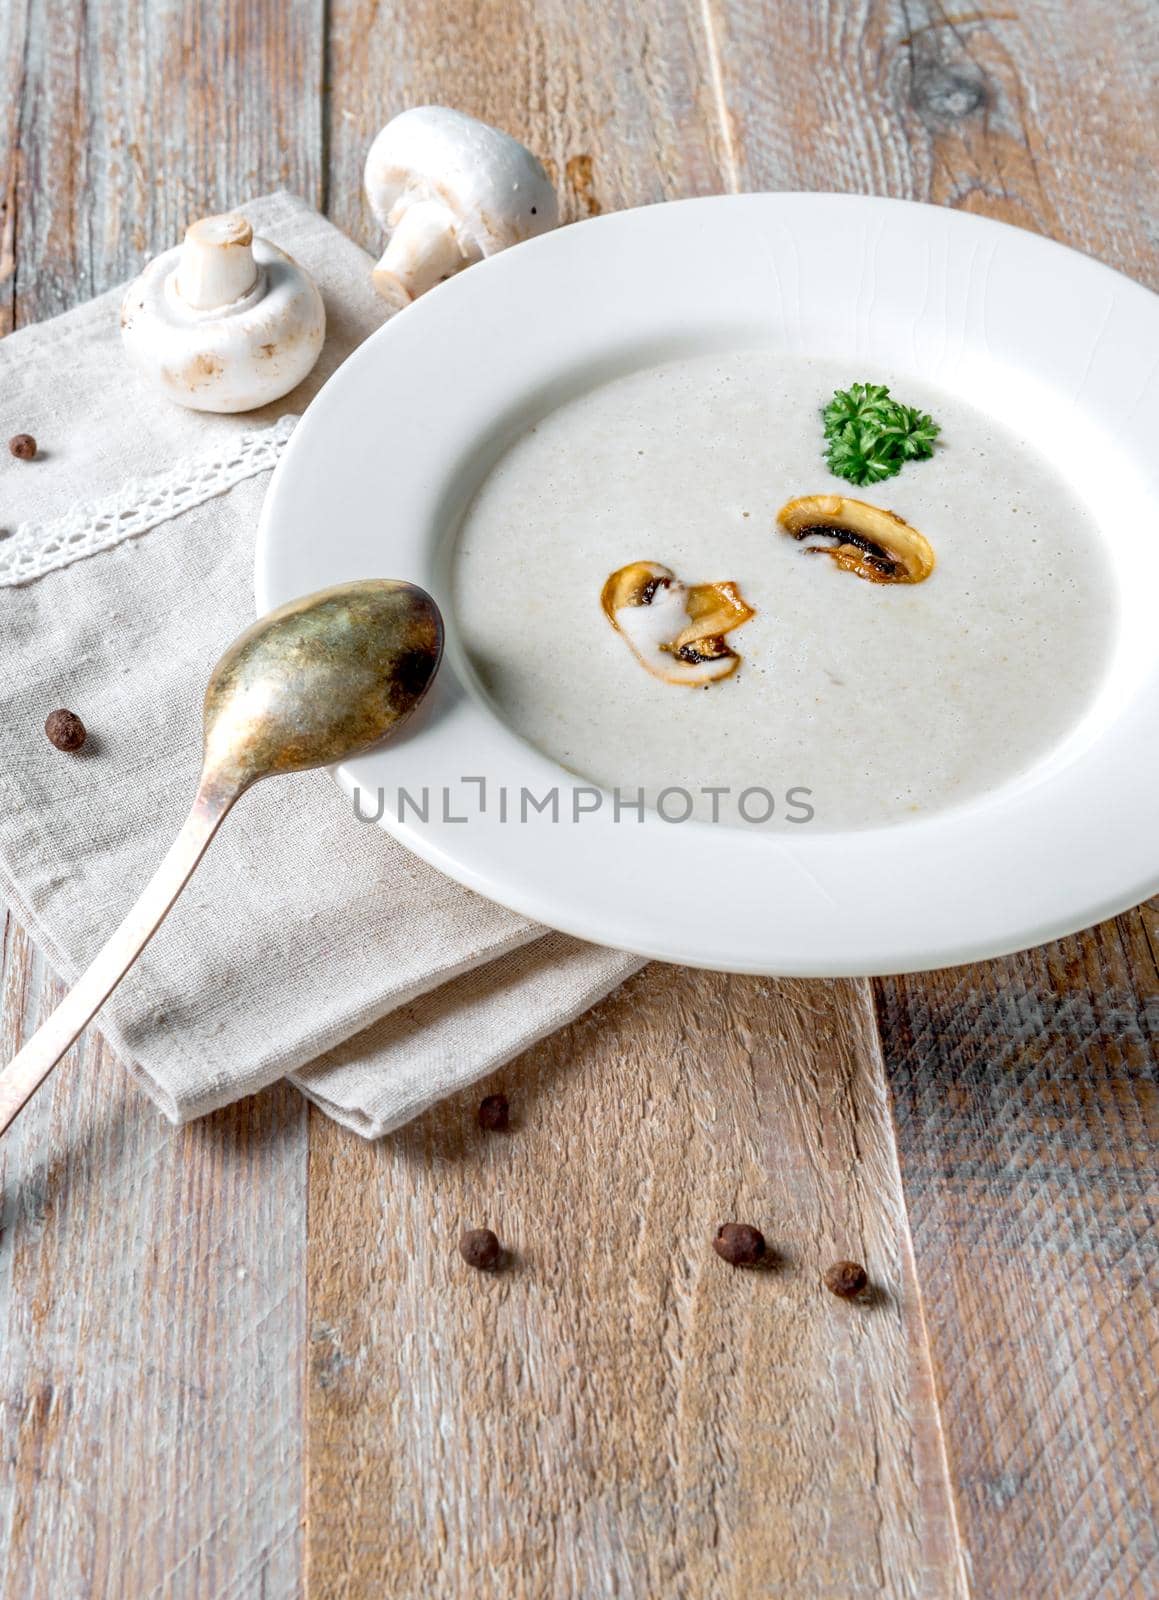 creamy mushroom soup with pieces of mushrooms in by tan4ikk1